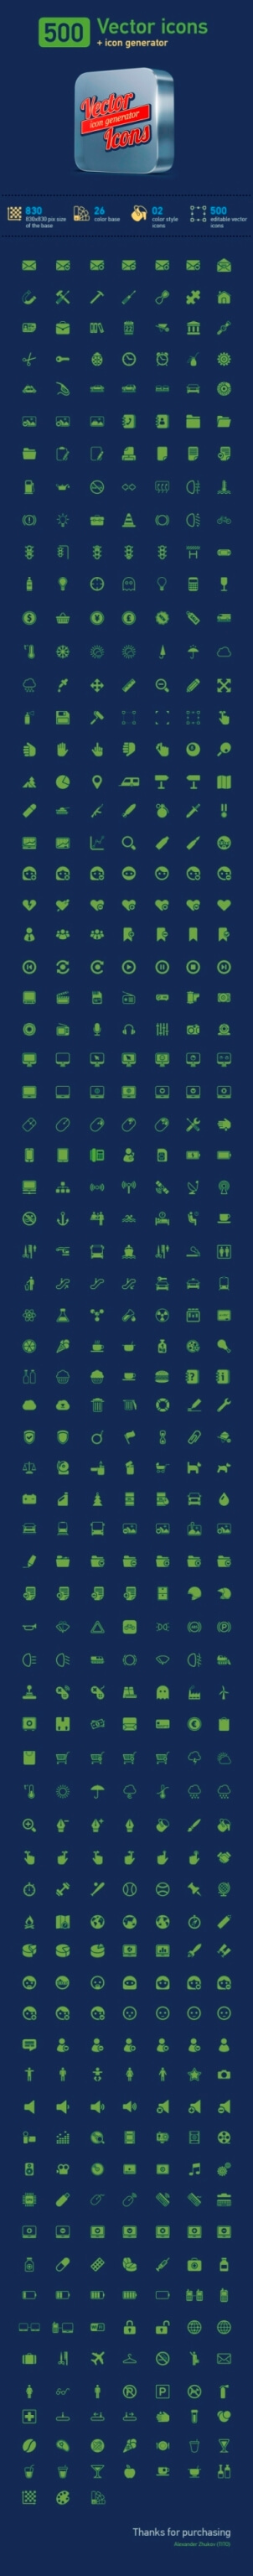 500 vector icons + icon generator by TIT0